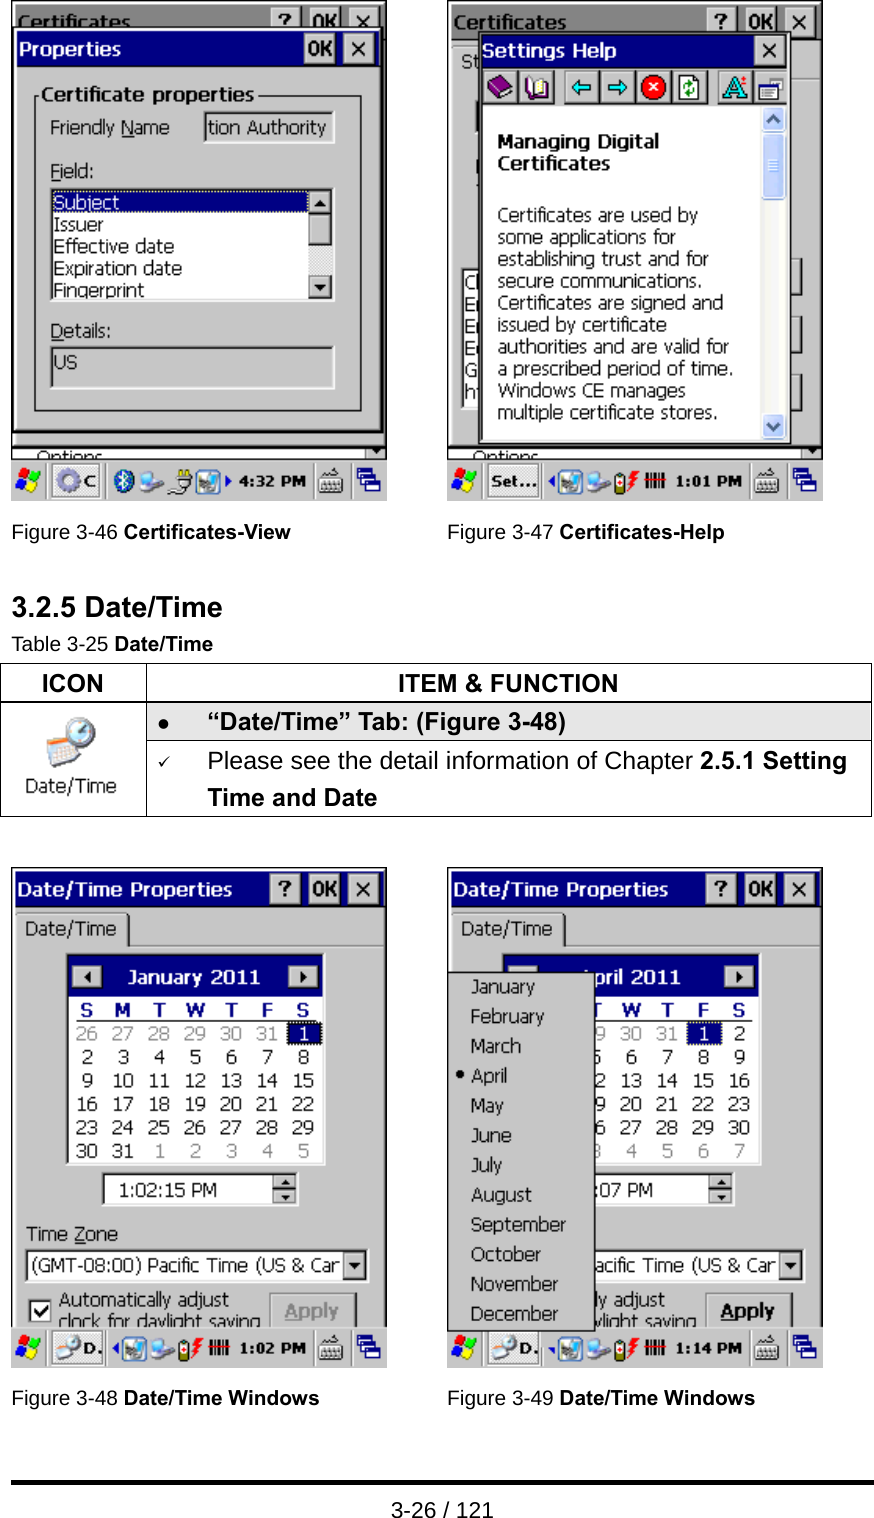  3-26 / 121    Figure 3-46 Certificates-View   Figure 3-47 Certificates-Help  3.2.5 Date/Time Table 3-25 Date/Time ICON  ITEM &amp; FUNCTION z “Date/Time” Tab: (Figure 3-48)    9 Please see the detail information of Chapter 2.5.1 Setting Time and Date      Figure 3-48 Date/Time Windows Figure 3-49 Date/Time Windows 